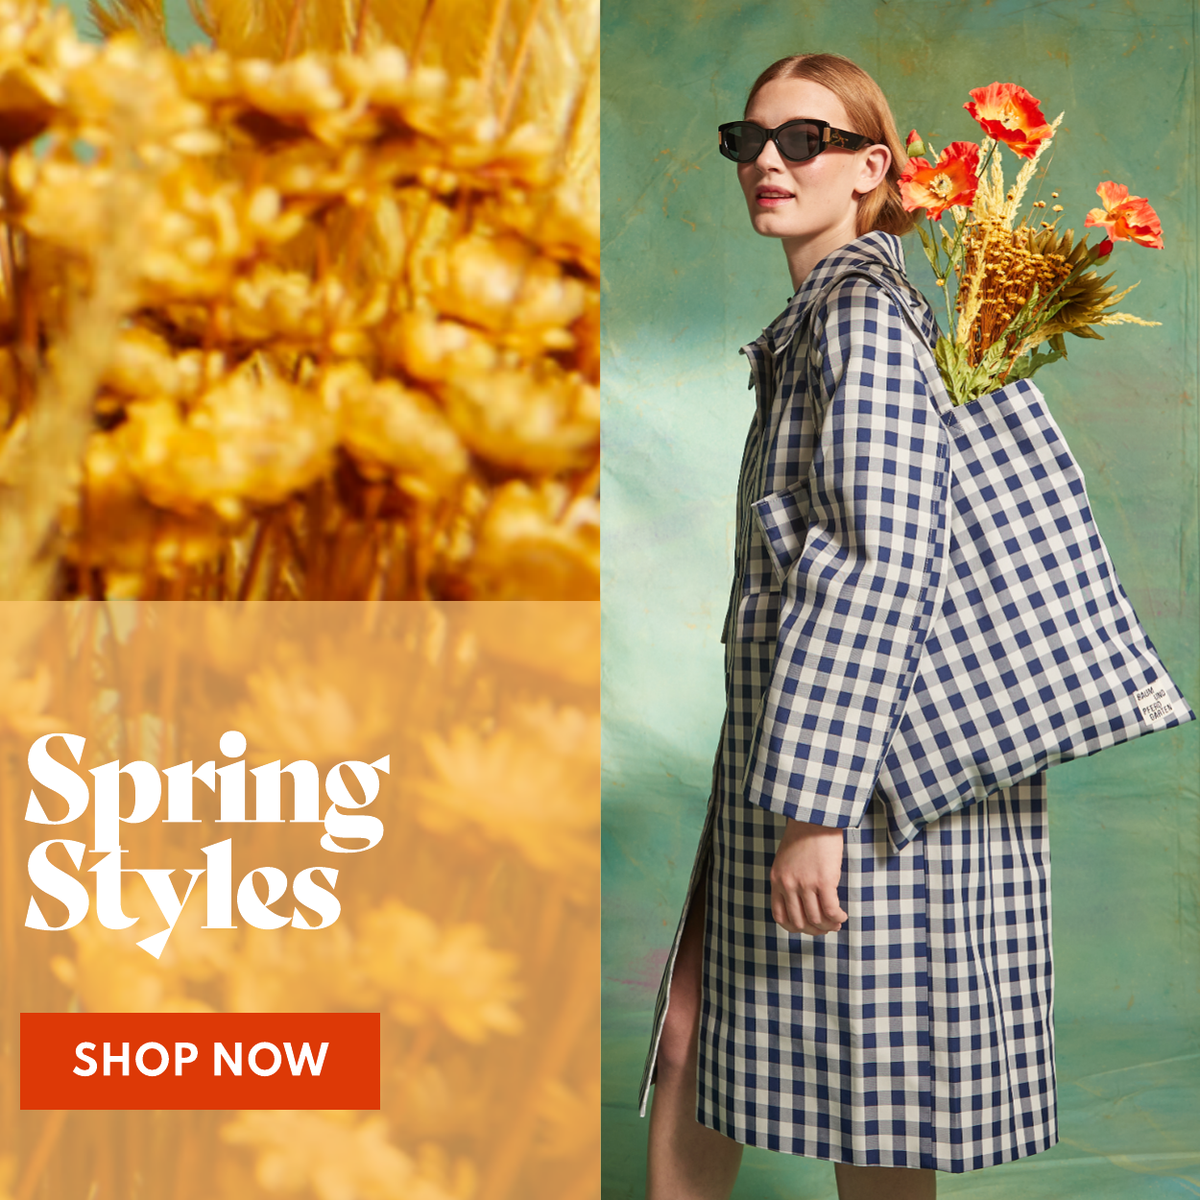 Spring Styles Shop Now